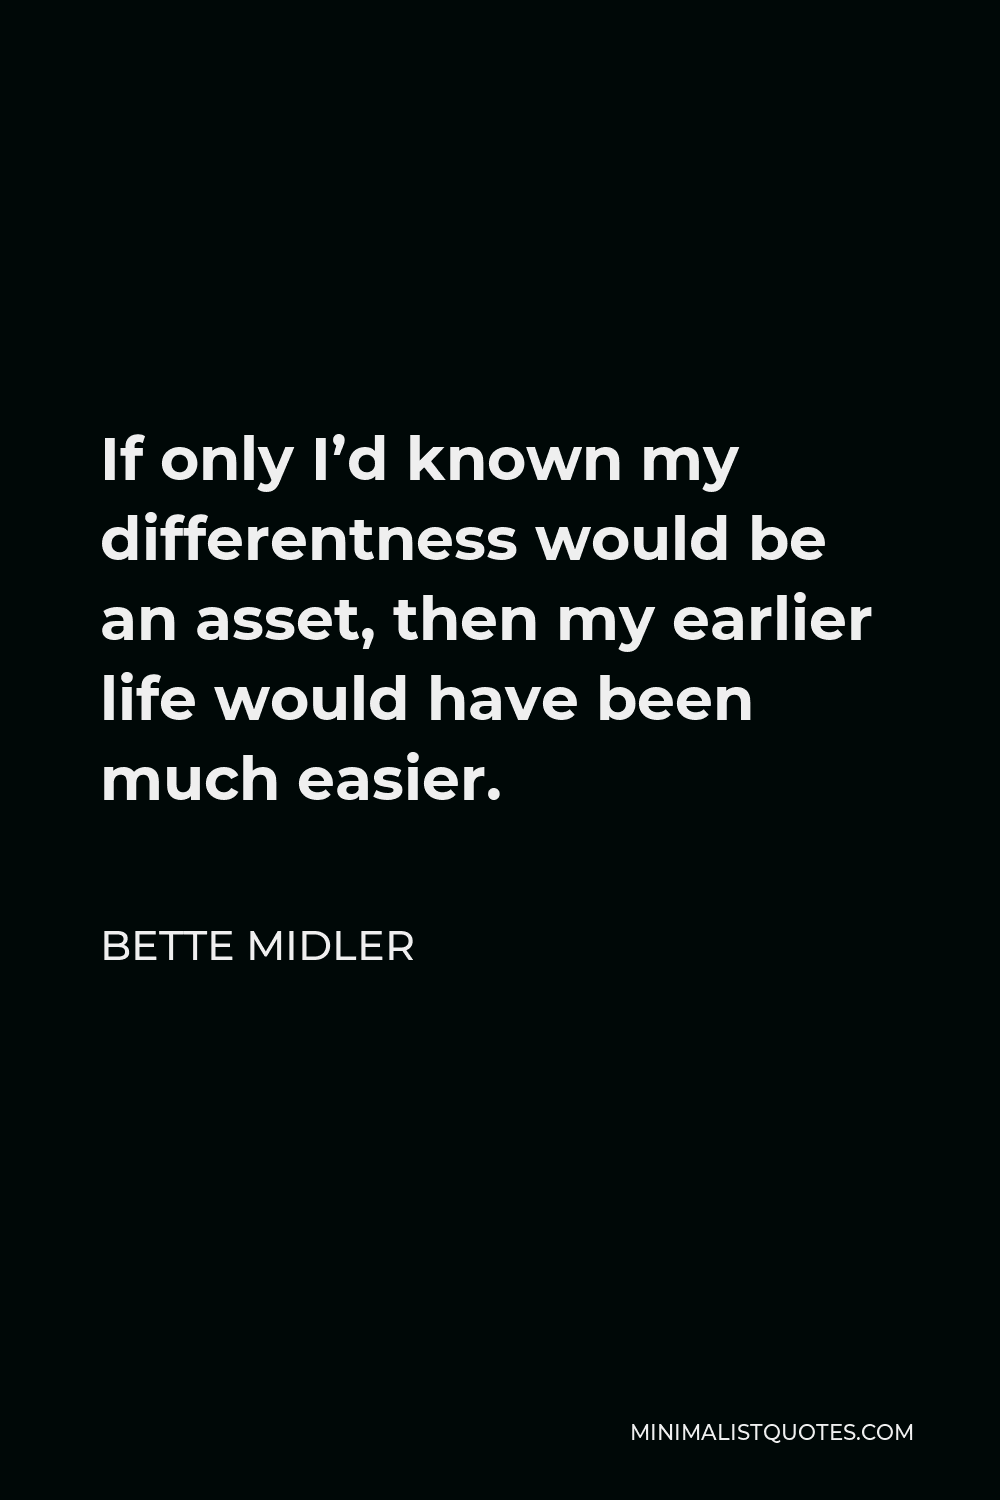 Bette Midler Quote - If only I’d known my differentness would be an asset, then my earlier life would have been much easier.